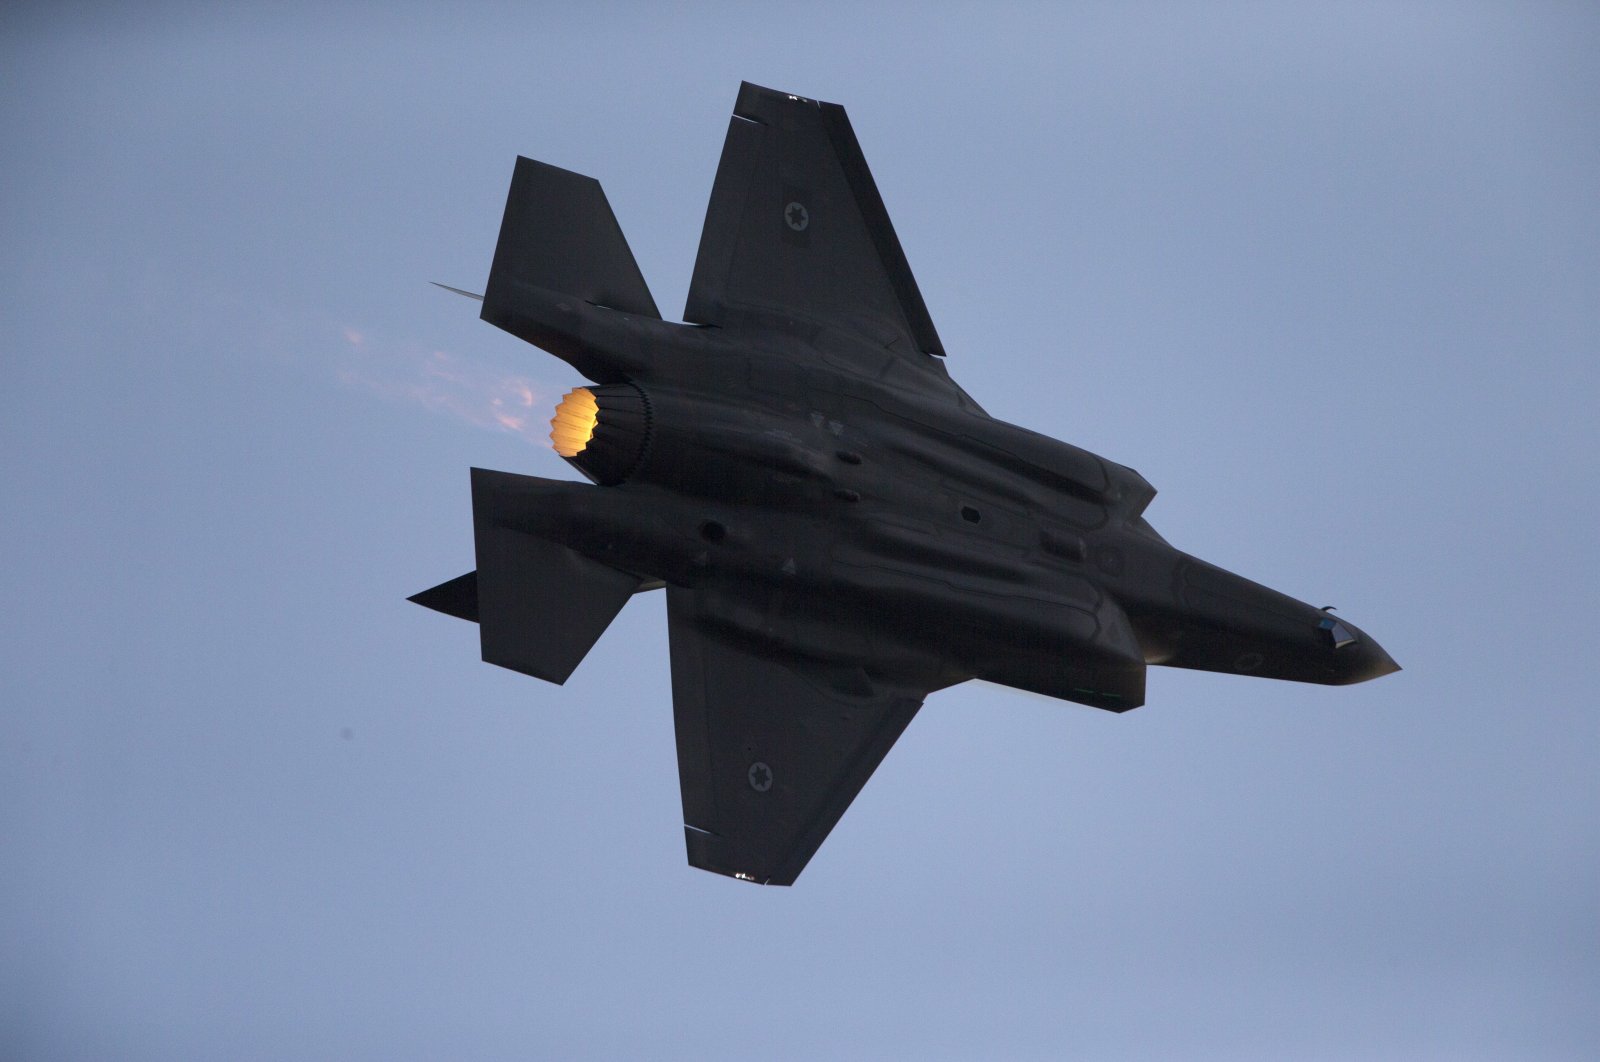 An Israeli Air Force F-35 plane performs during a graduation ceremony for new pilots in the Hatzerim Air Force Base near Beersheba, Israel, Dec. 29, 2016. (AP Photo)